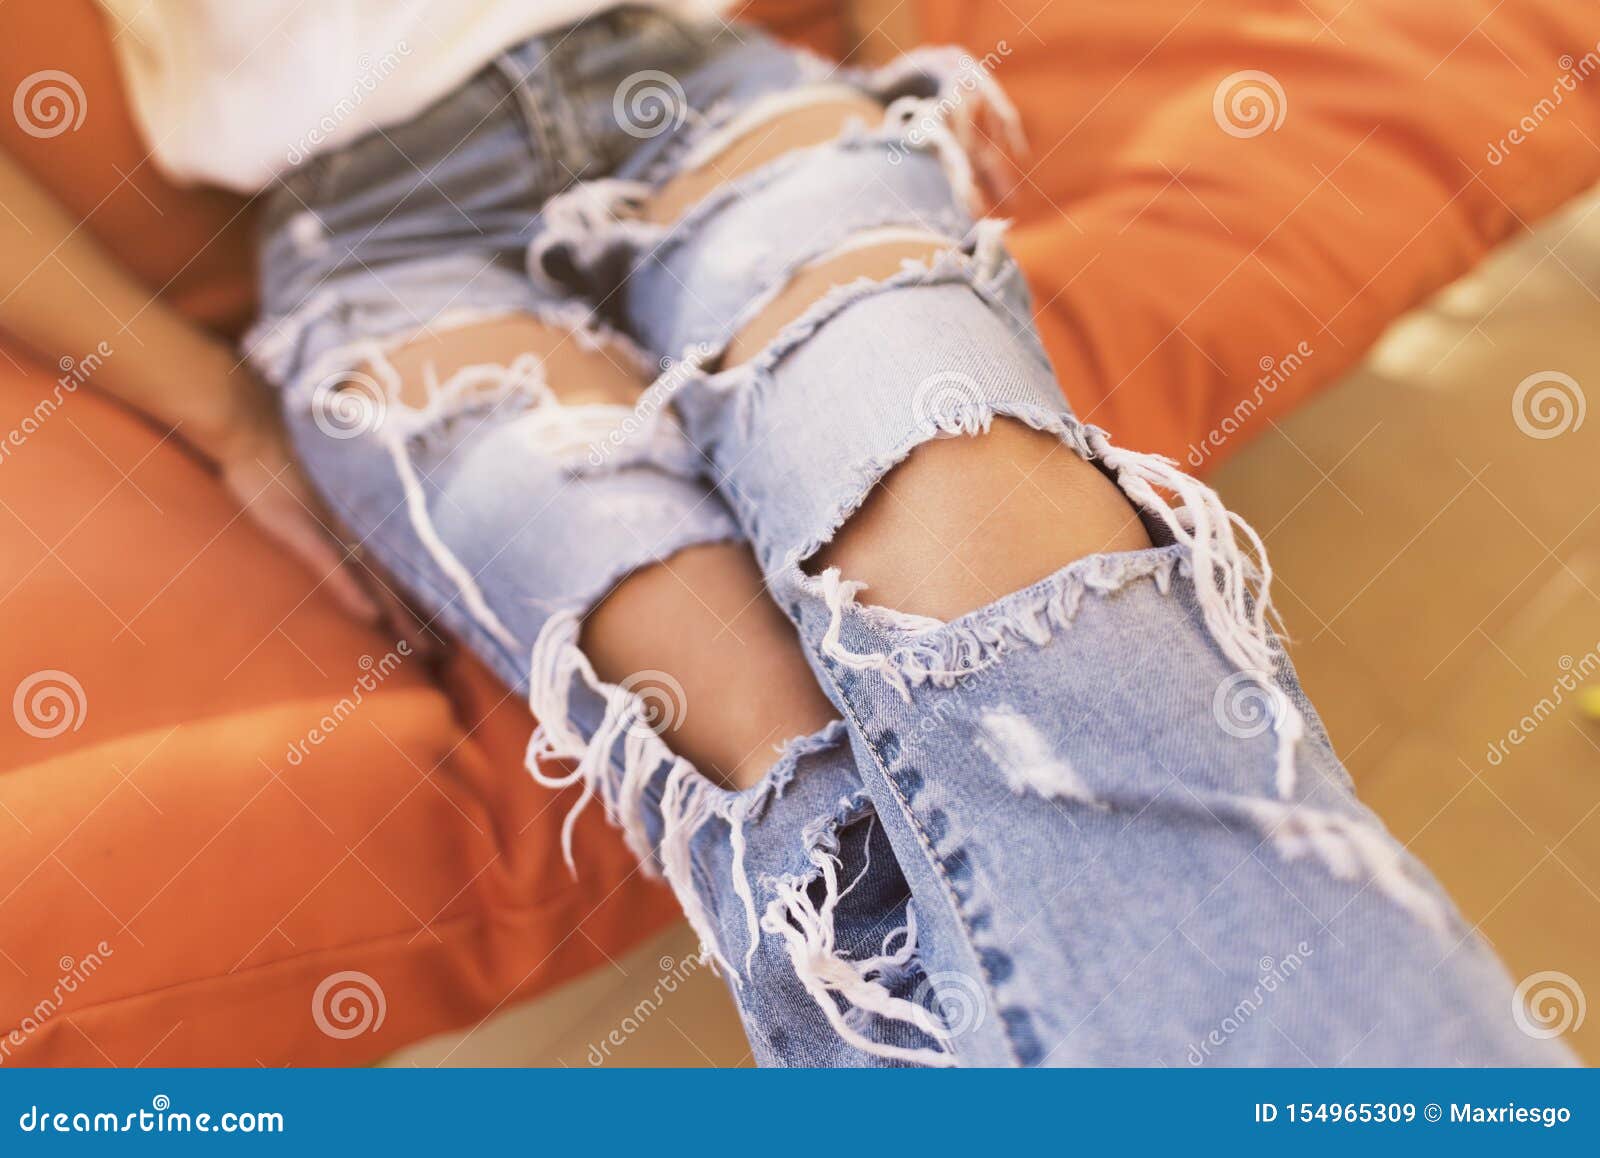 Anonymous Image Of Woman With Torn Jeans On A Summer Day Stock Image Image Of Jeans Adults